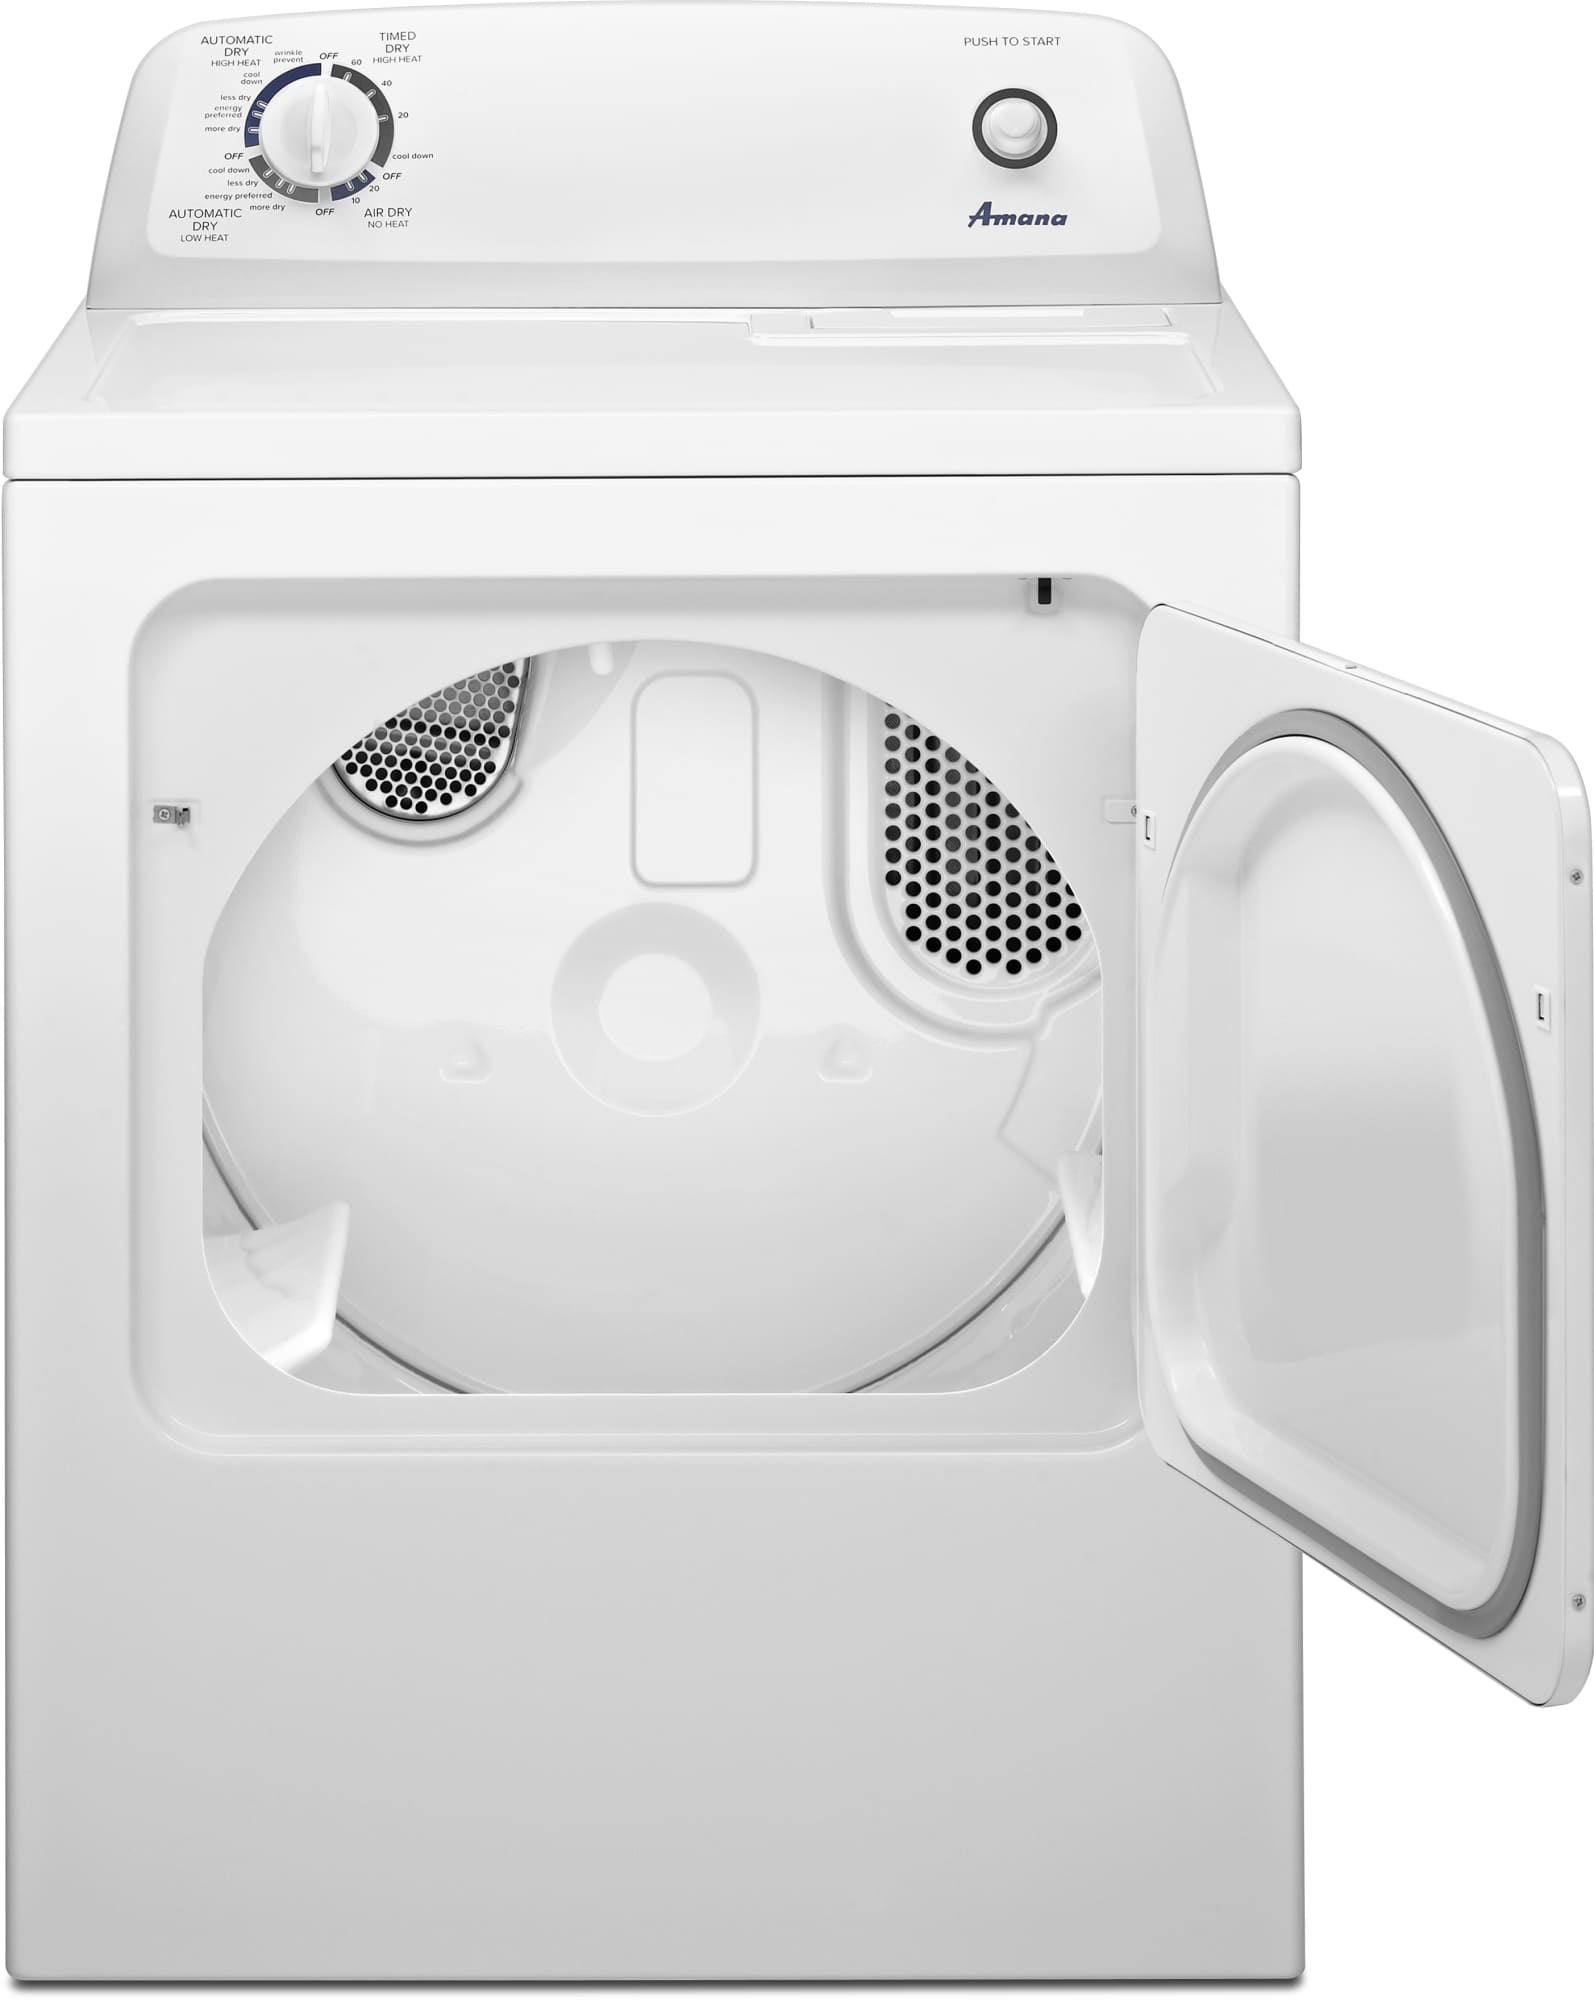 amana-ned4655ew-29-inch-electric-dryer-with-6-5-cu-ft-capacity